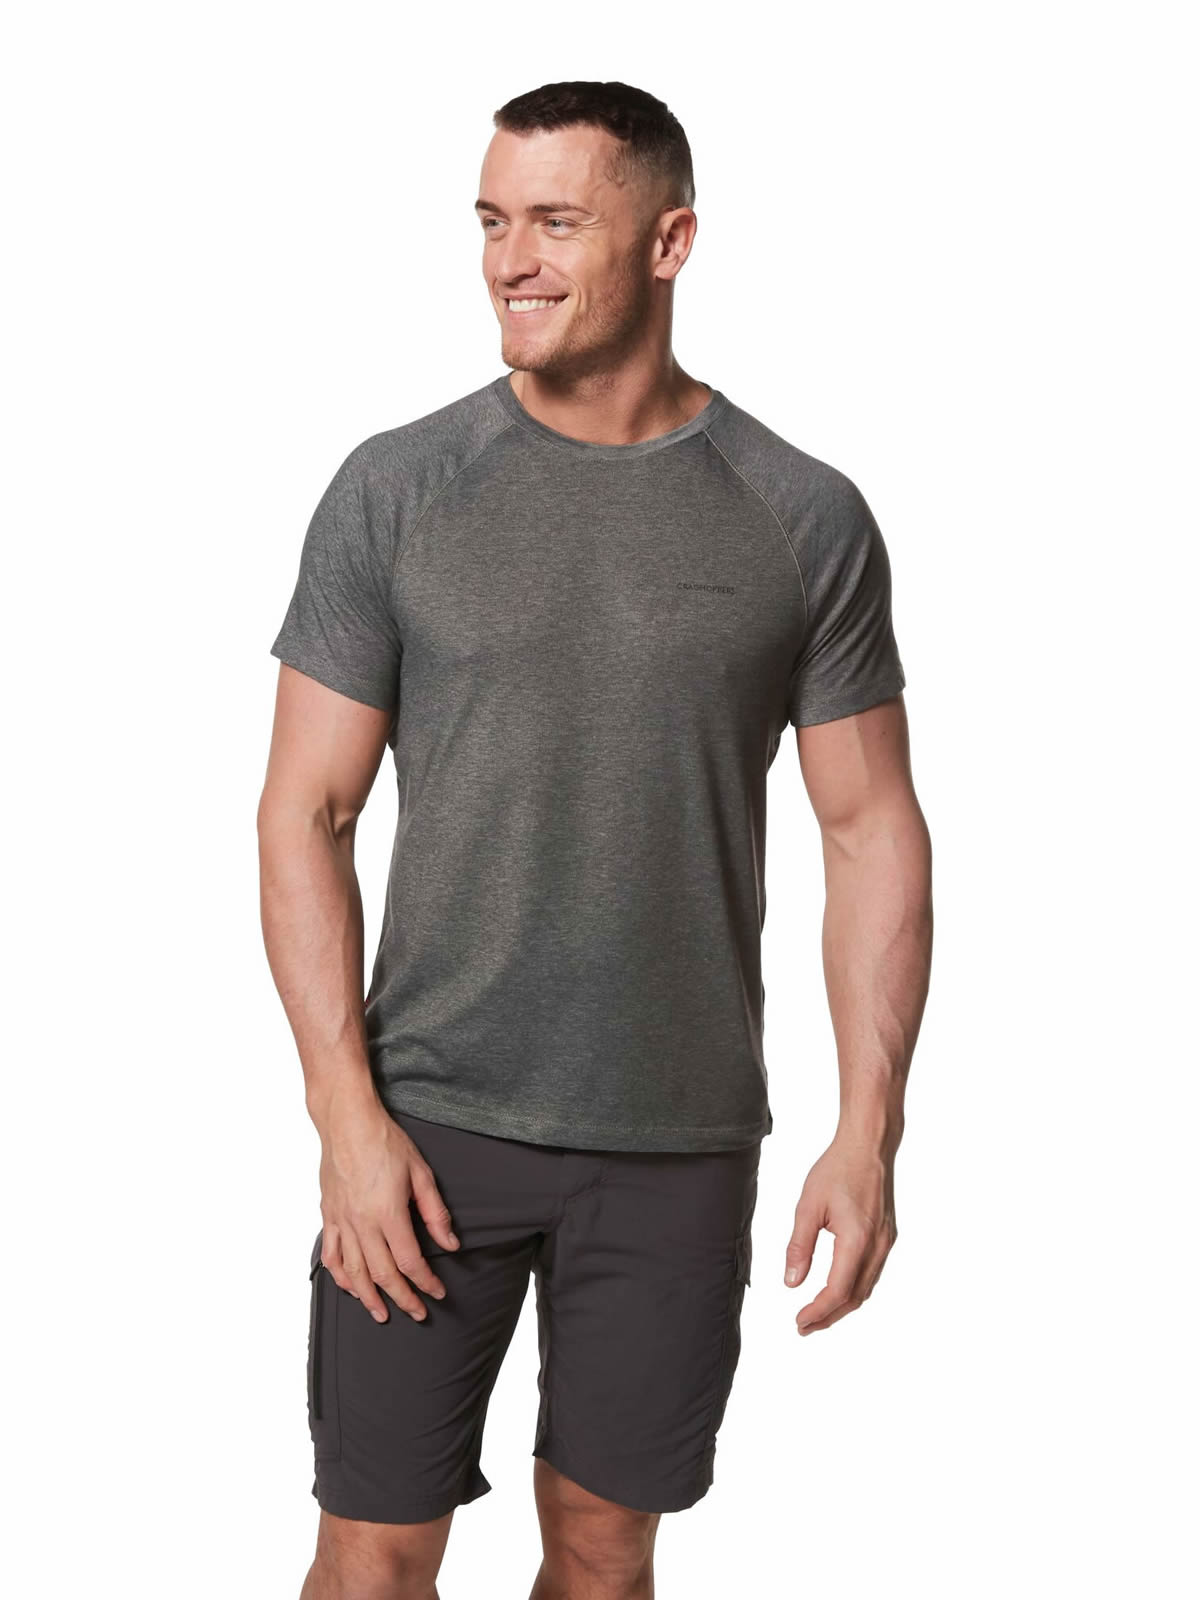 Craghoppers Mens NosiLife Anello Short Sleeve T Shirt Tee Top Black Grey Sports 